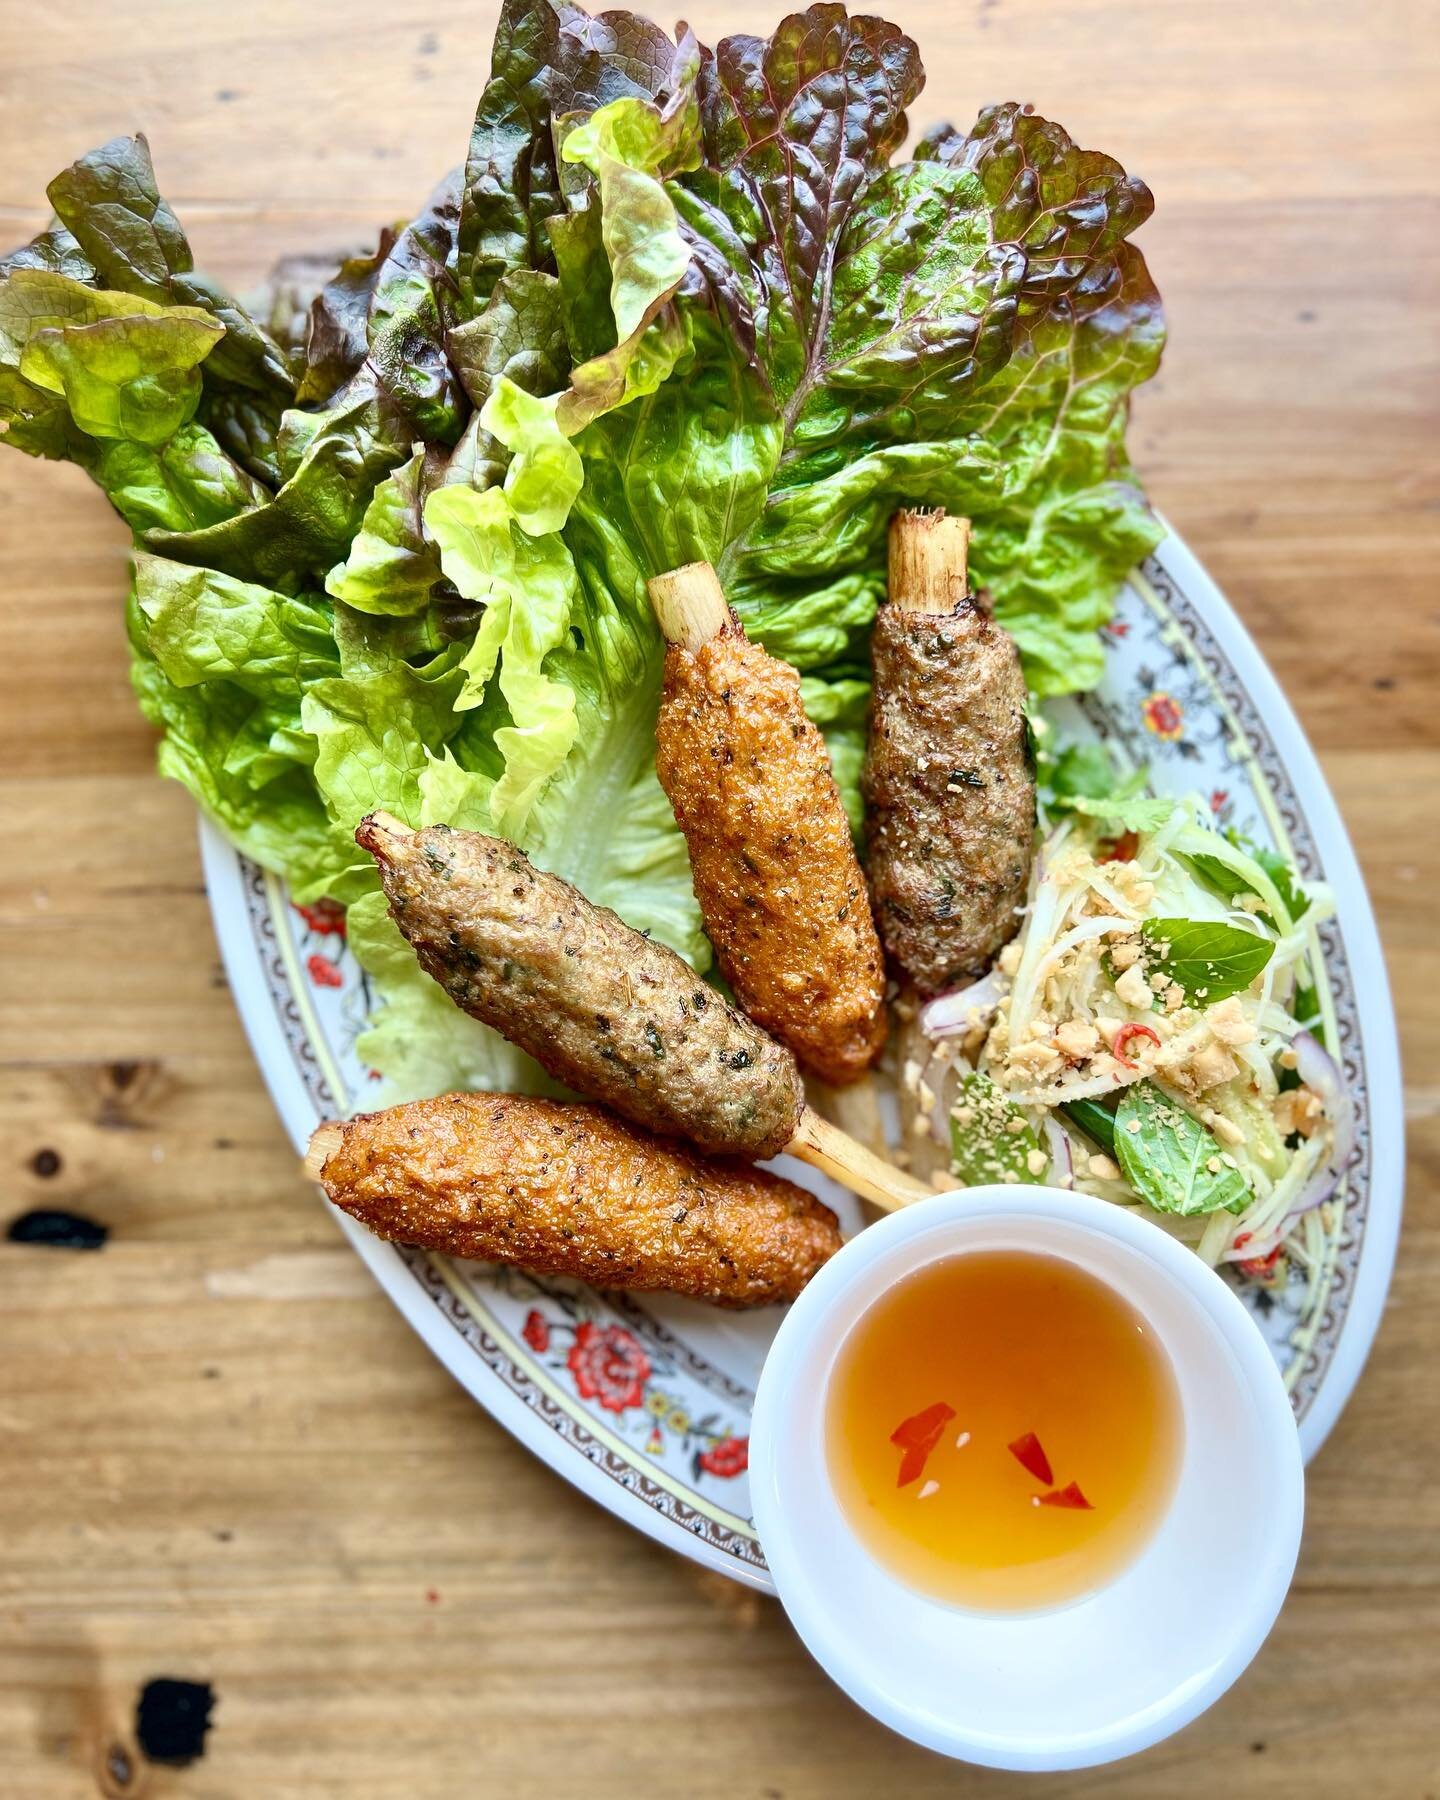 THAI SUGARCANE SKEWERS: two Sai Oua Thai sausage skewers &amp; two Tod Mun red curry fish cake wrapped around sugarcane skewers, served with green papaya salad, lettuce for wrapping &amp; nuoc cham! This is a Thai &amp; Vietnamese mashup are the skew